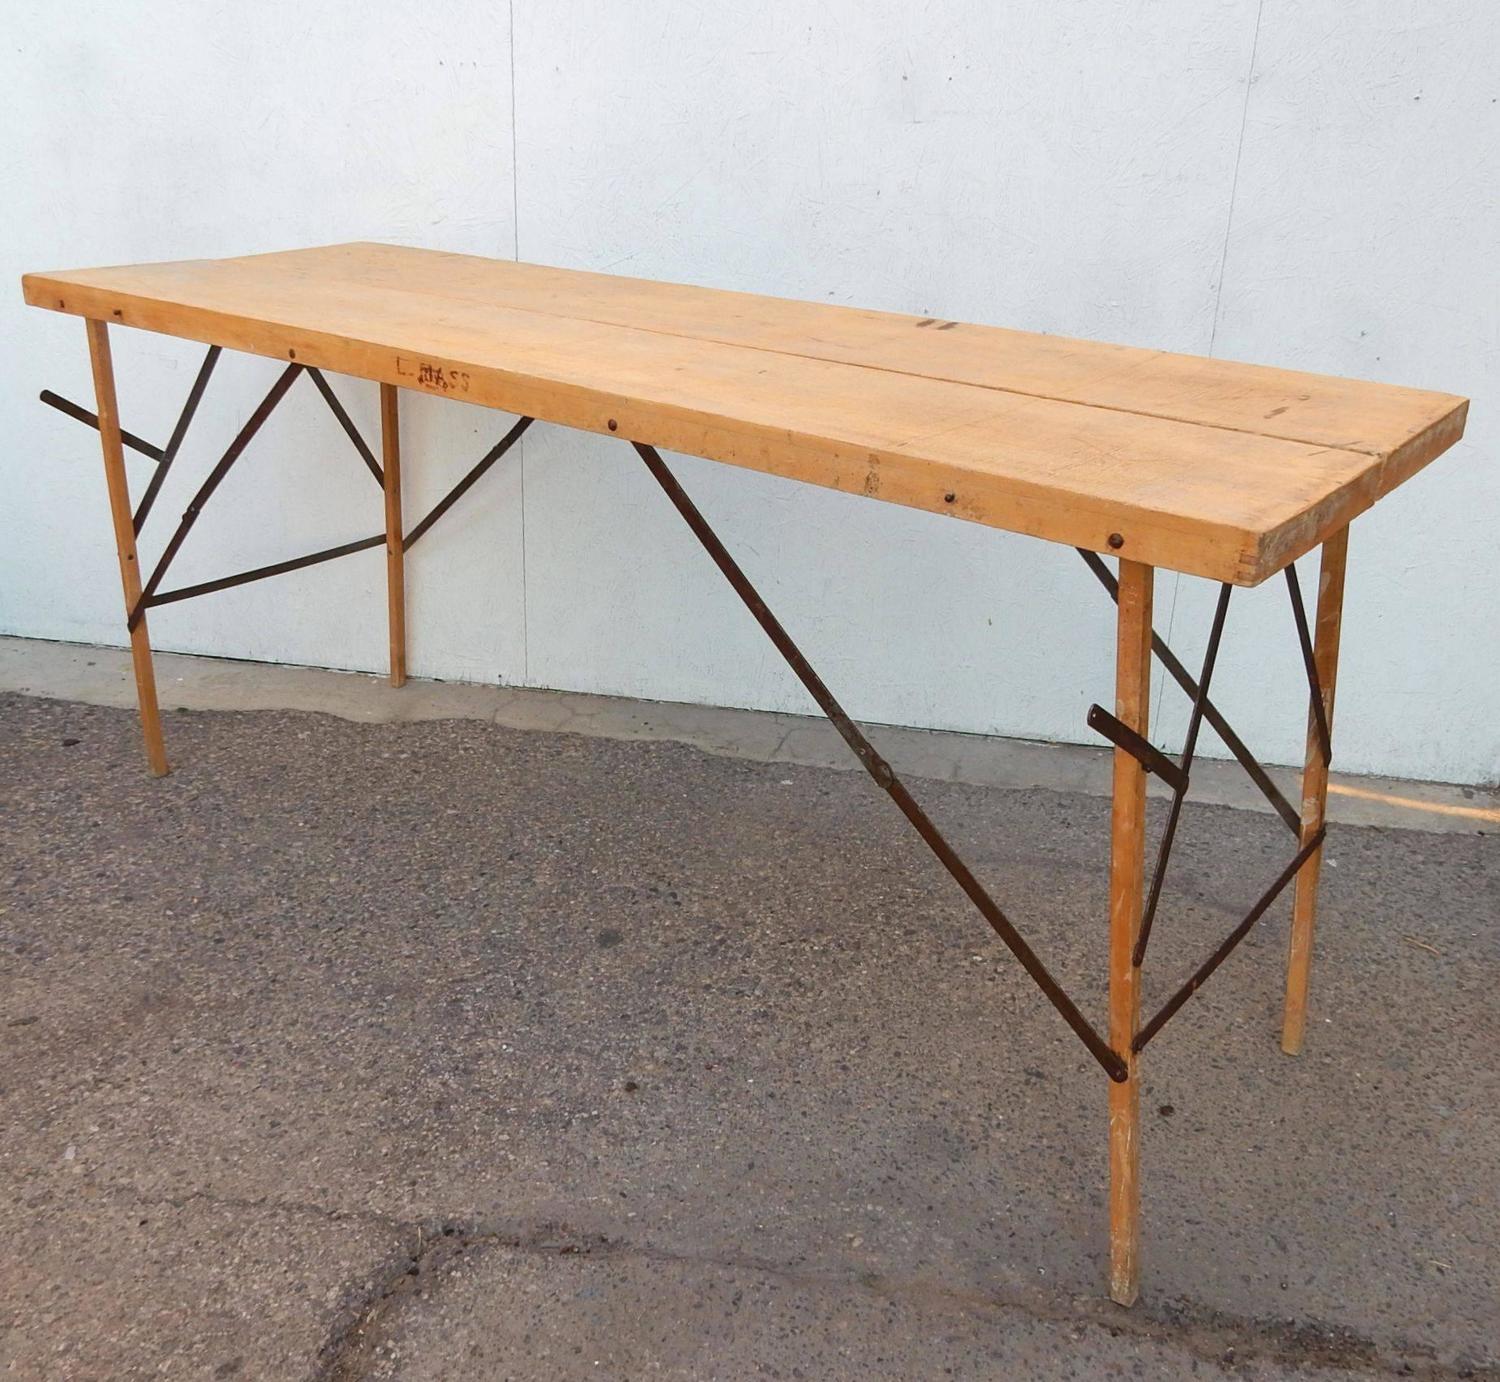 1930s Industrial Wallpaper Hangers Folding Table Or Desk For Sale At